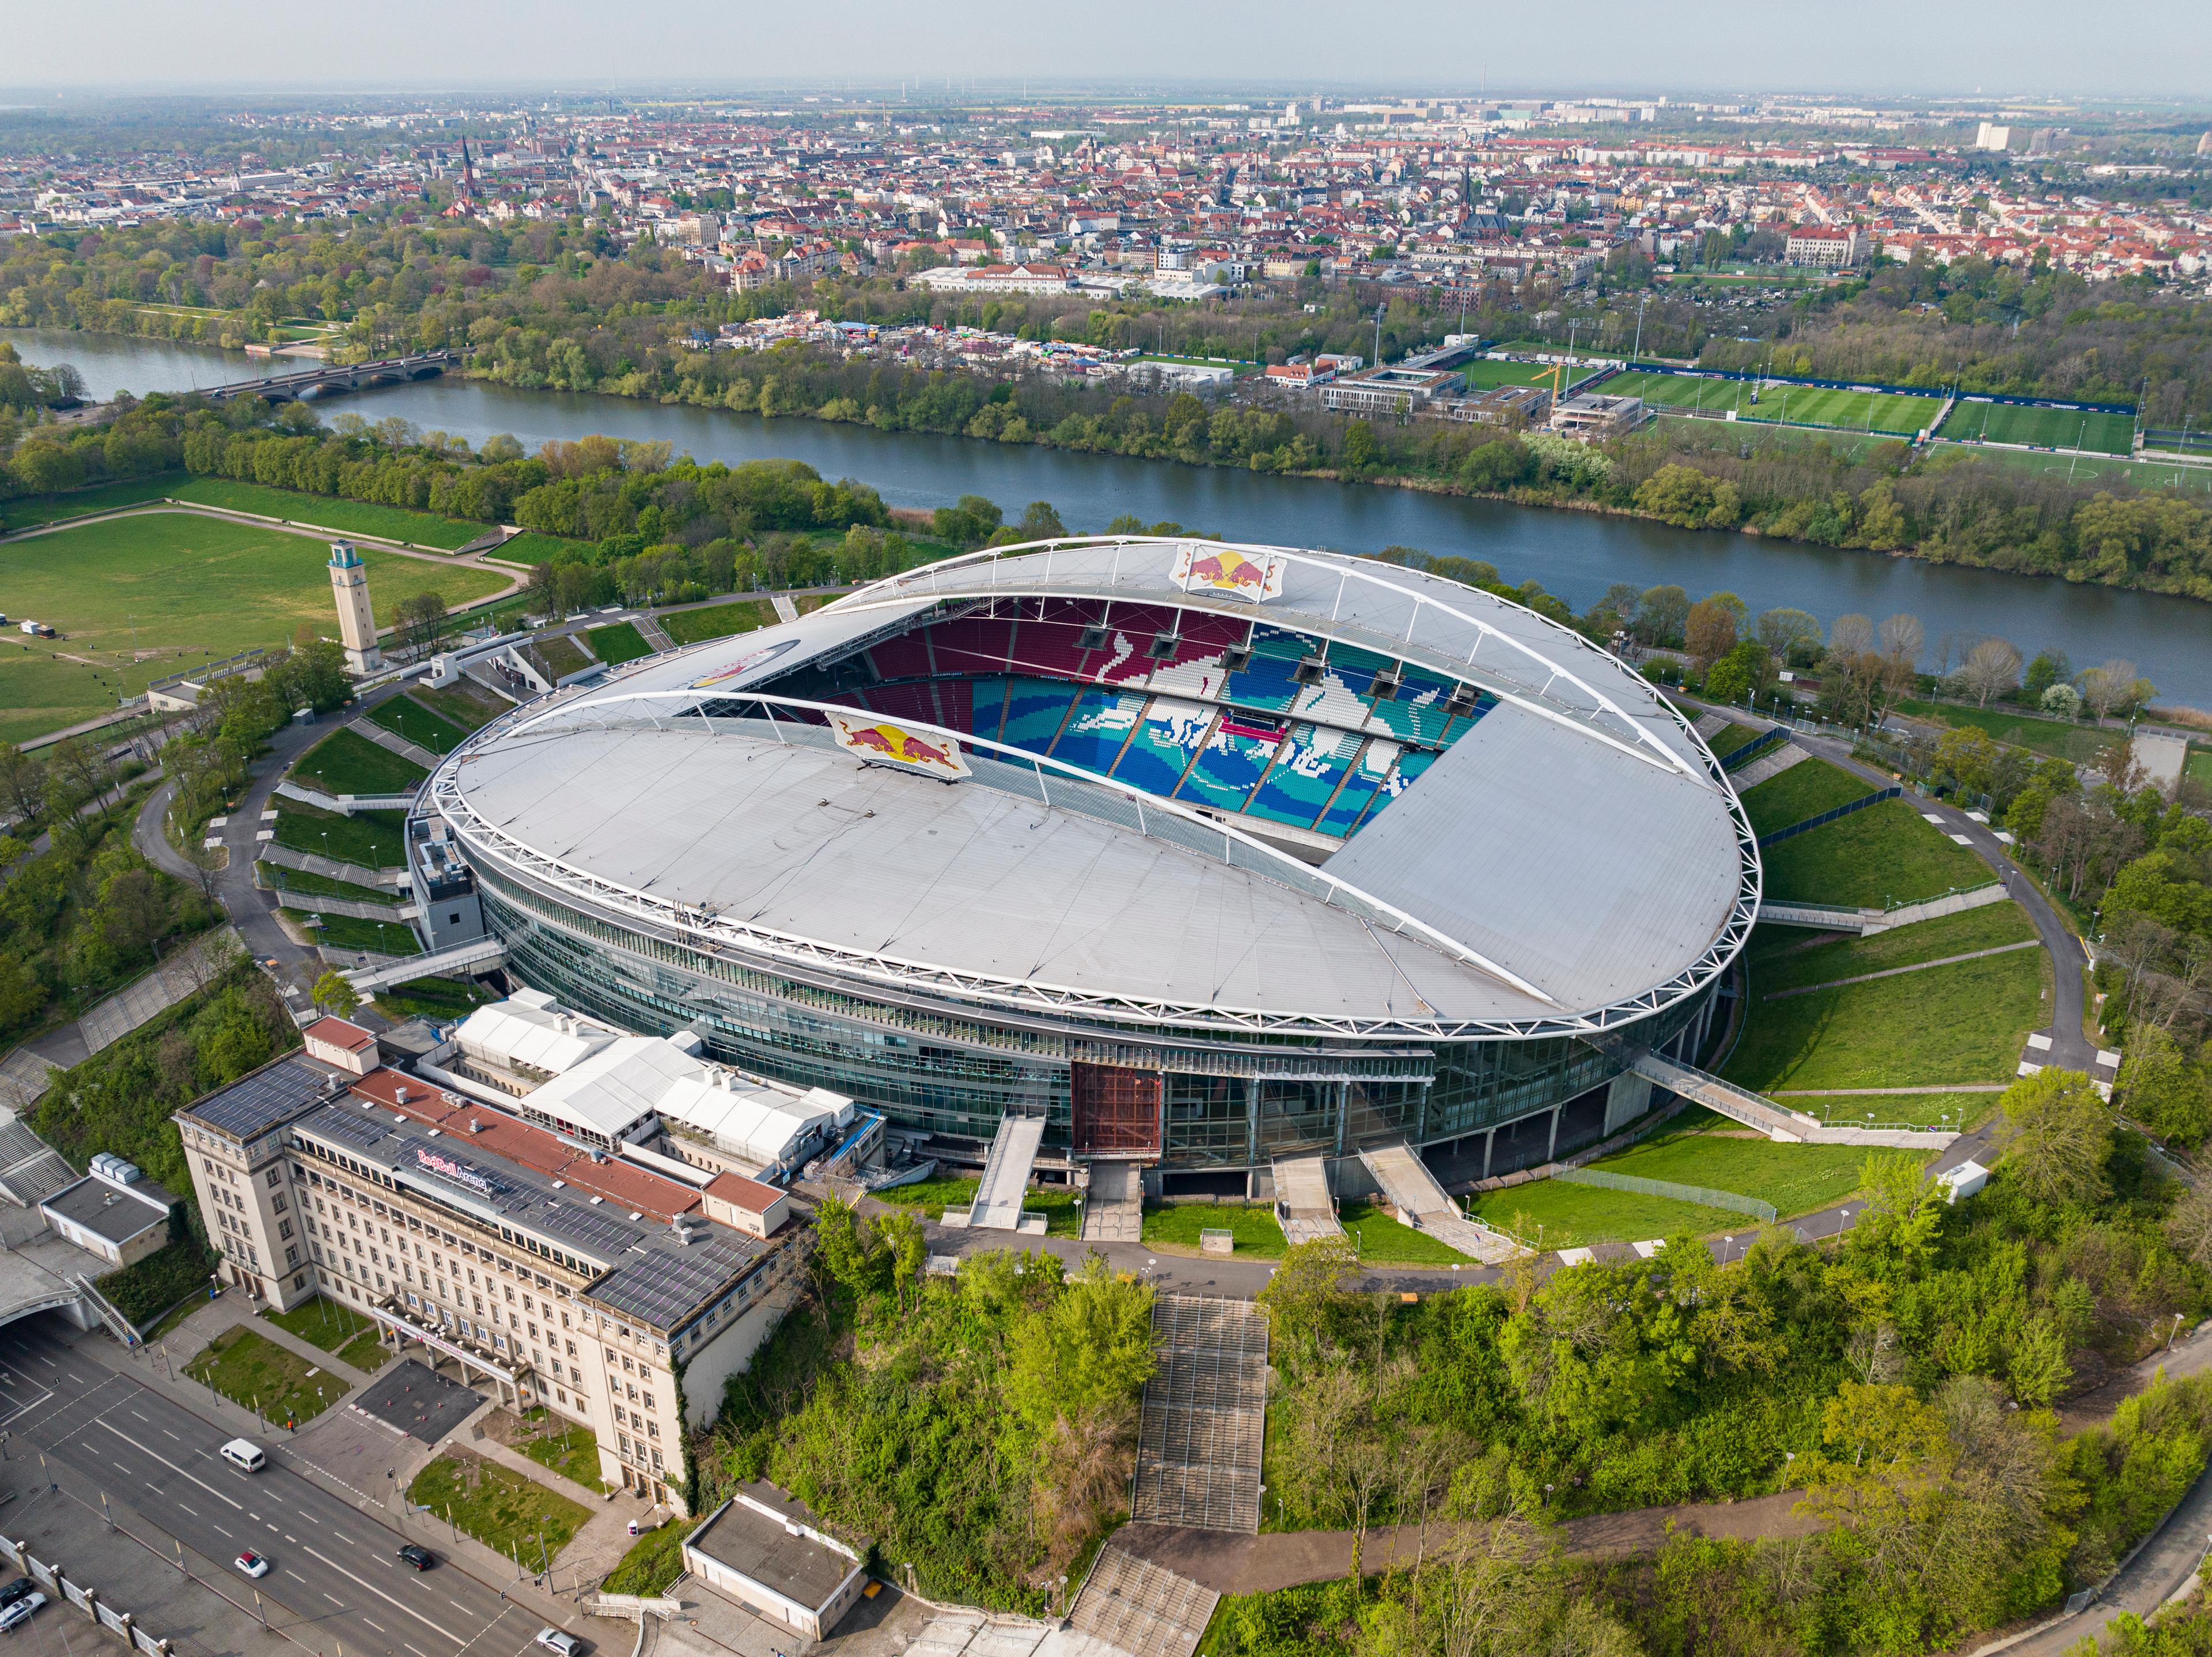 The view from above shows the location of the Leipzig Stadium in the countryside.